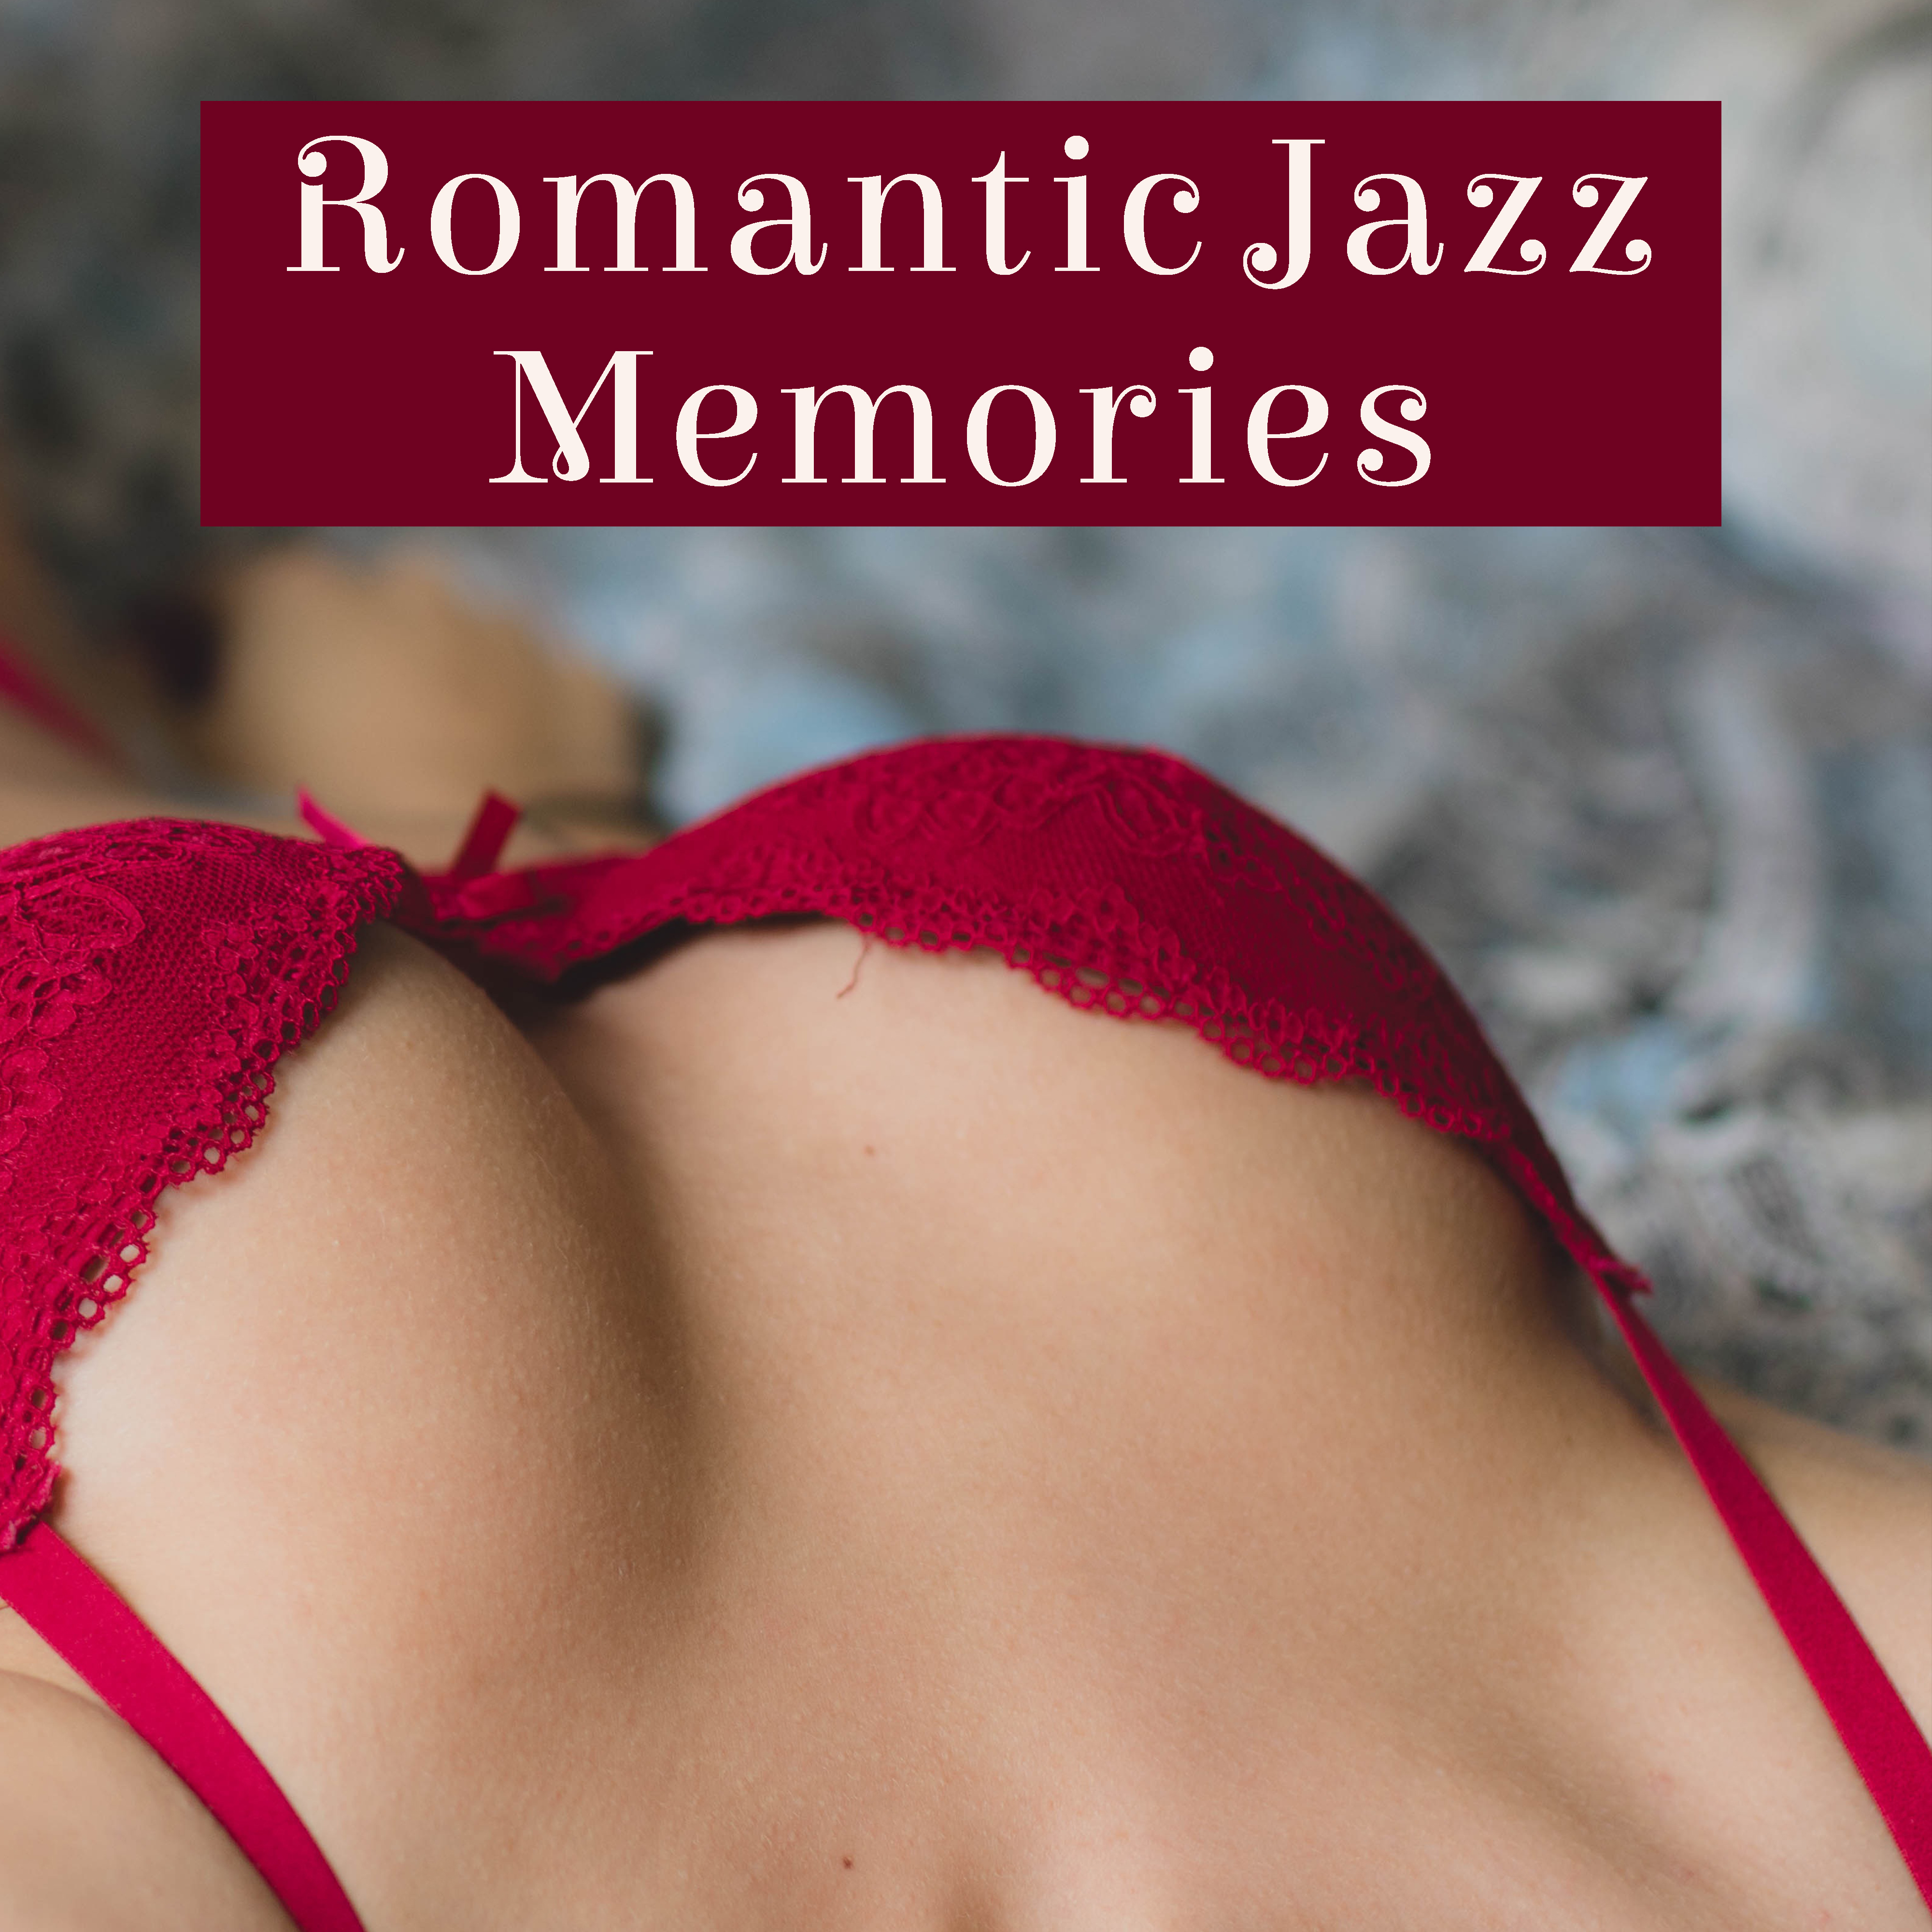 Romantic Jazz Memories  Smooth Sounds to Relax, Easy Listening, Peaceful Vibes